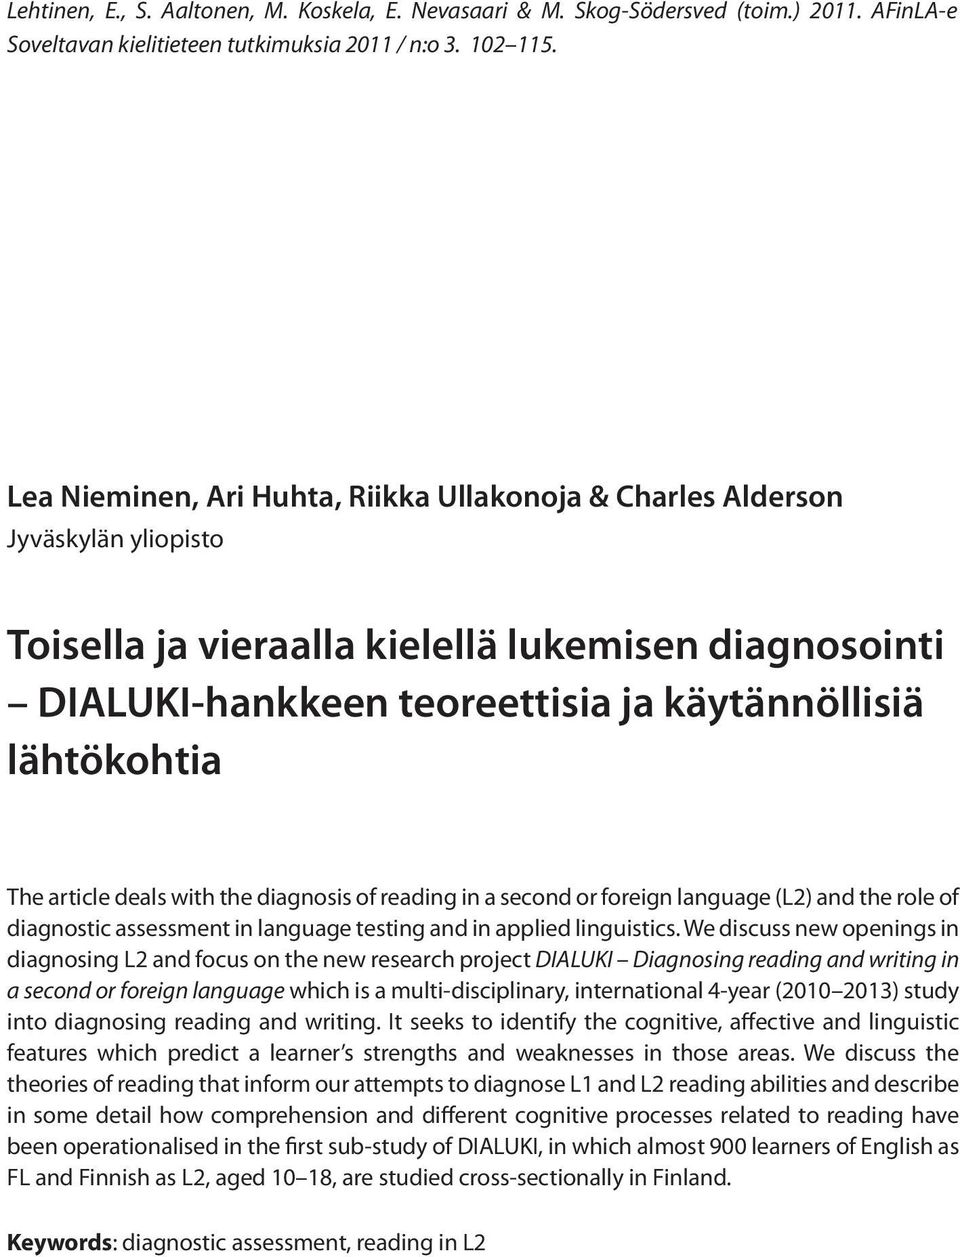 The article deals with the diagnosis of reading in a second or foreign language (L2) and the role of diagnostic assessment in language testing and in applied linguistics.